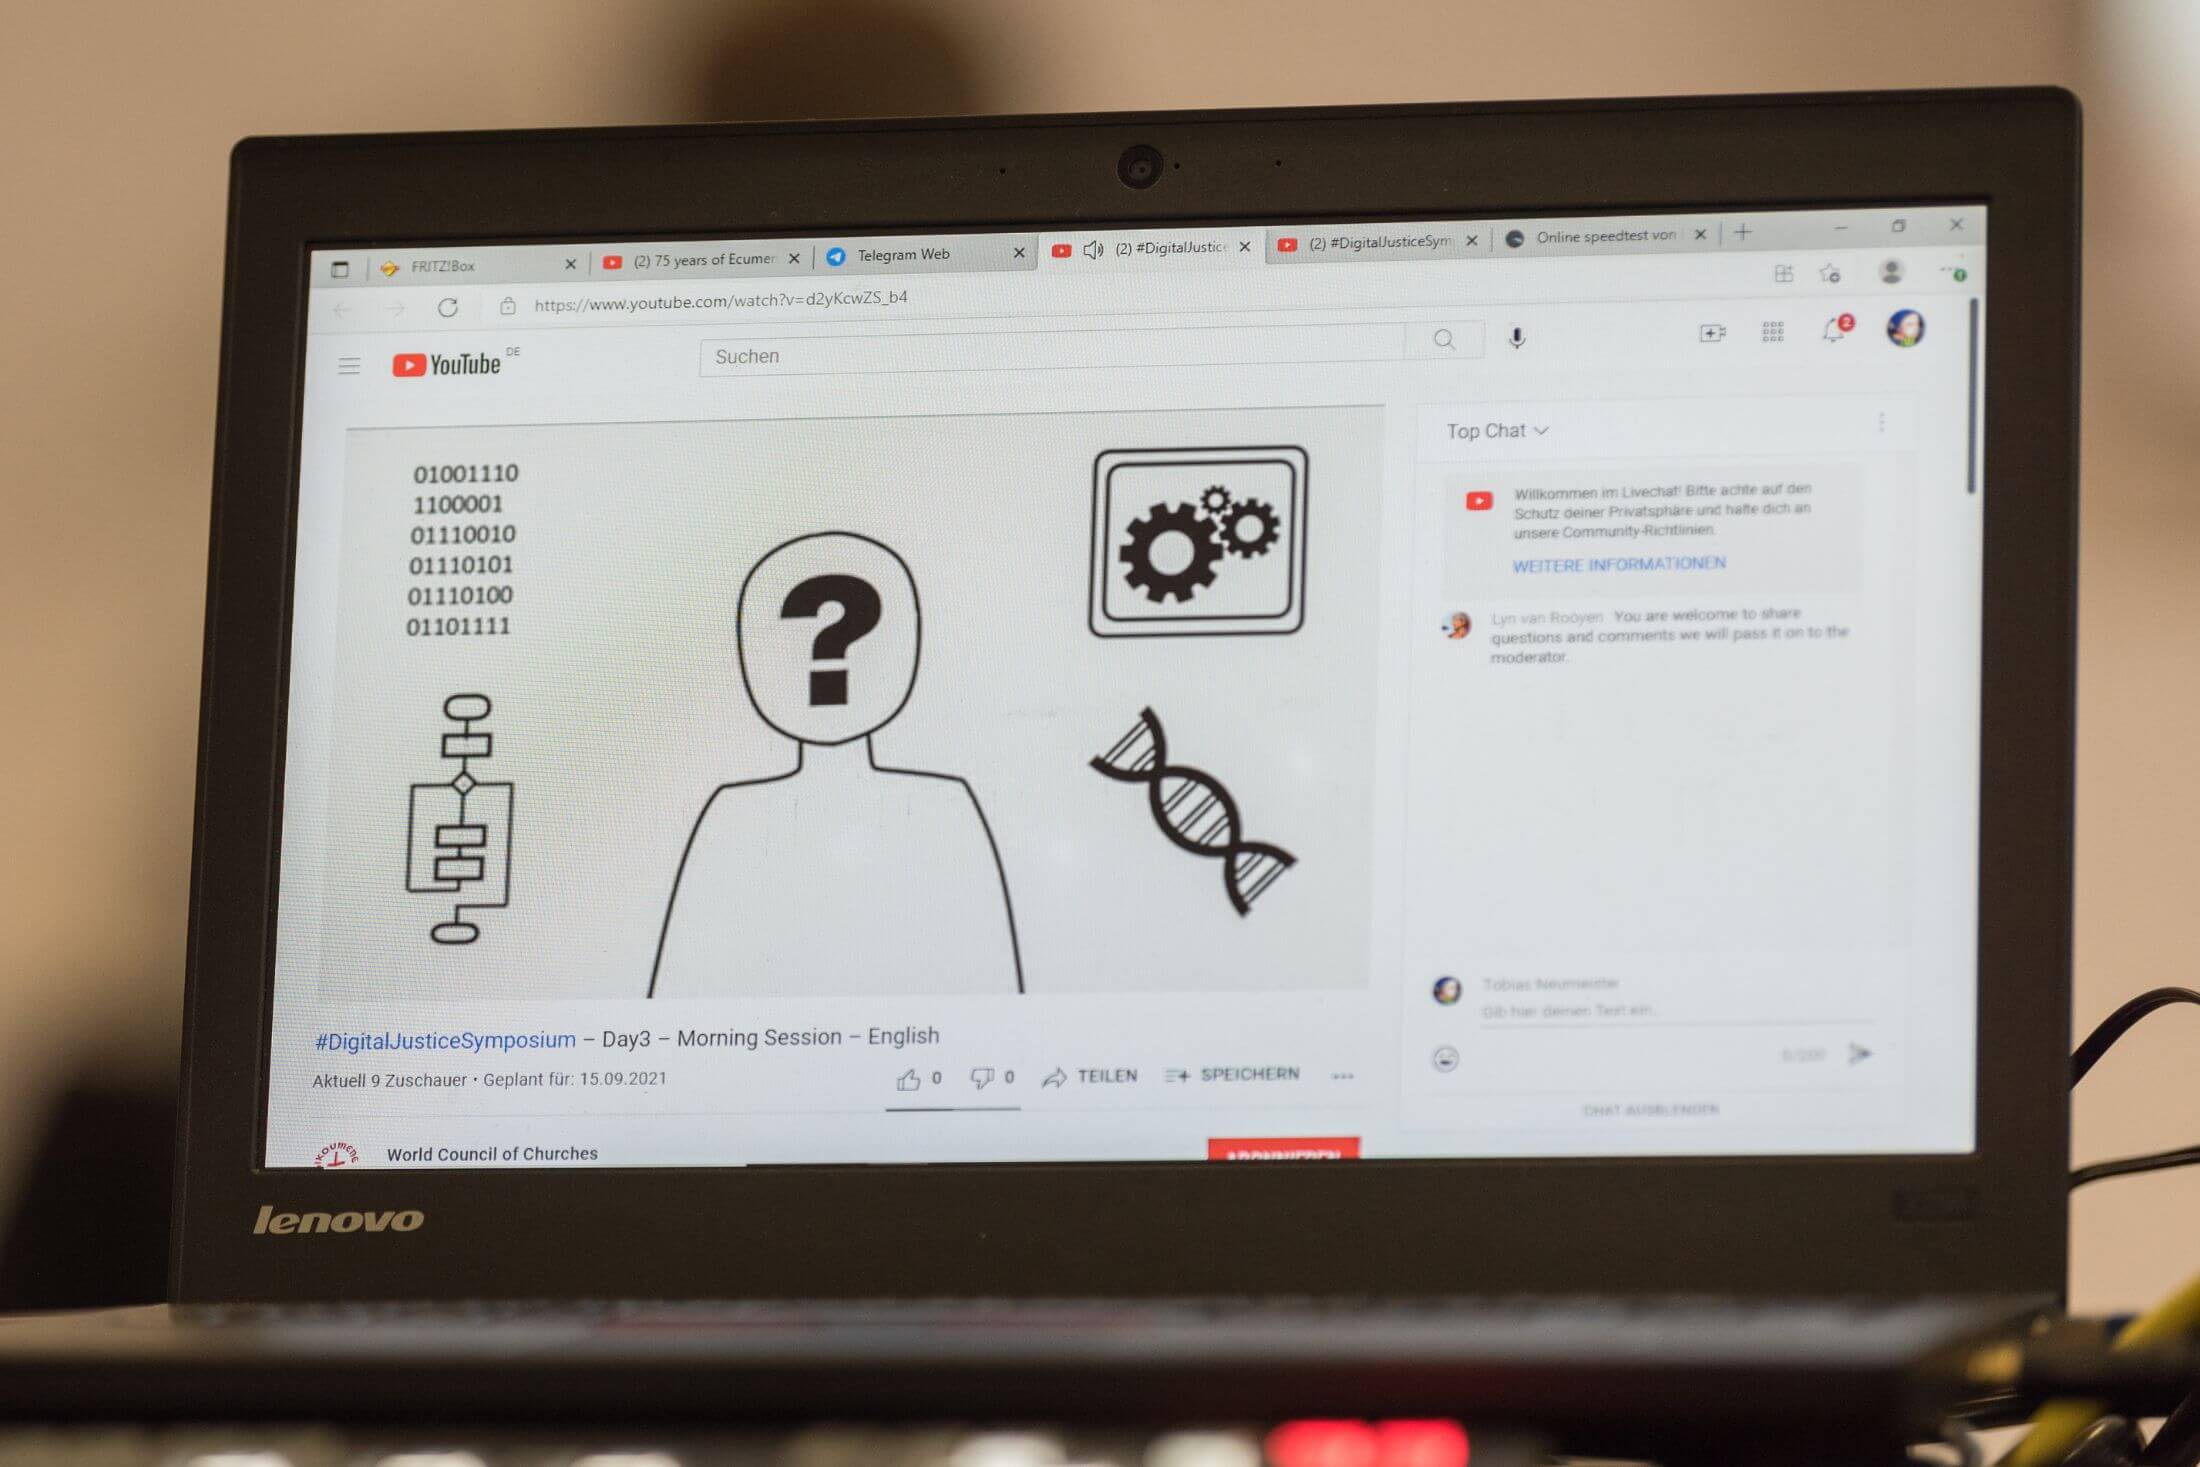 Laptop screen that displays an outline drawing of a person's upper body and head with a question mark where the face would be